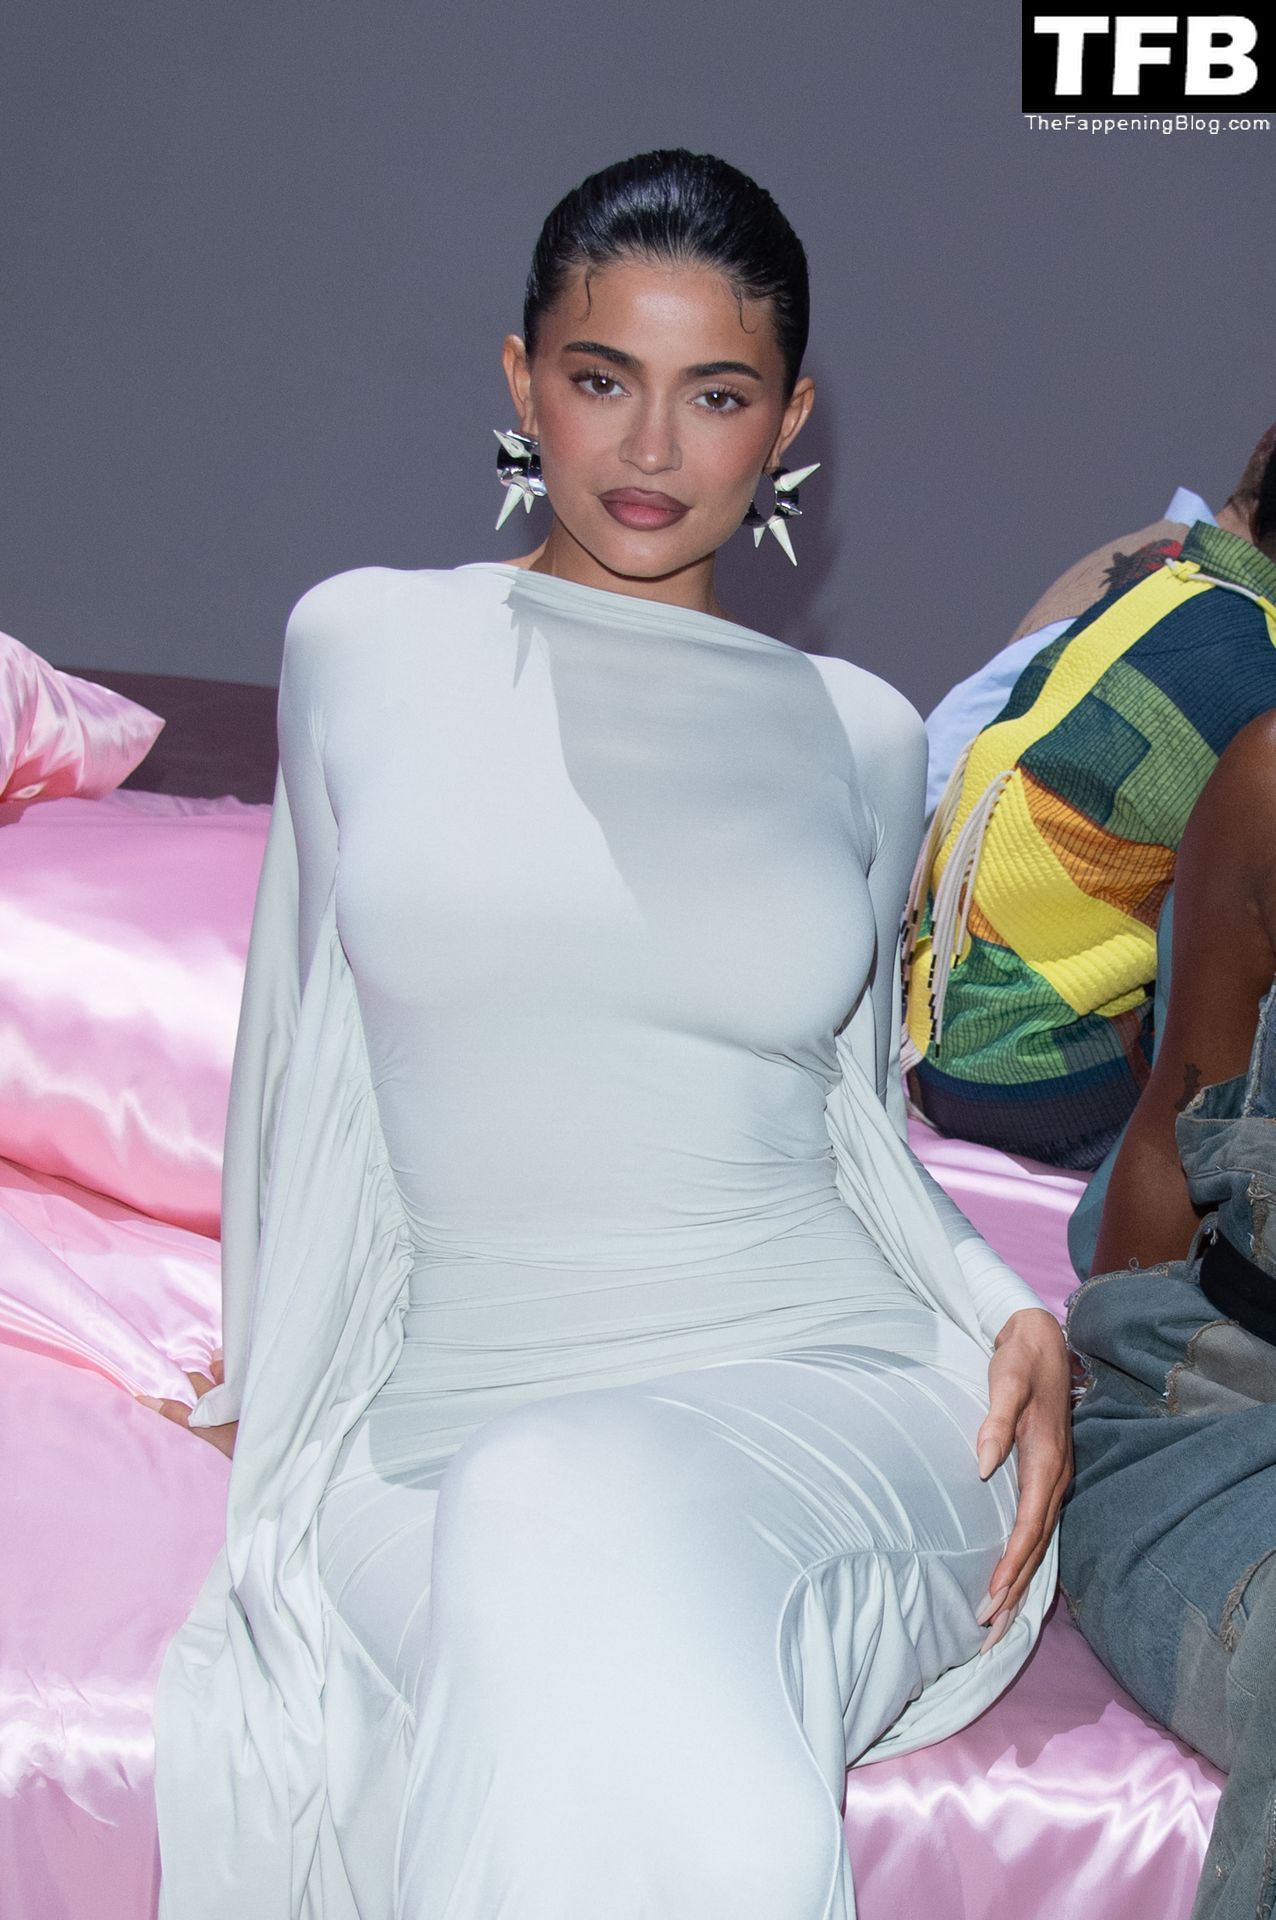 Kylie Jenner Flaunts Her Curves in a White Dress During Paris Fashion Week (150 Photos)